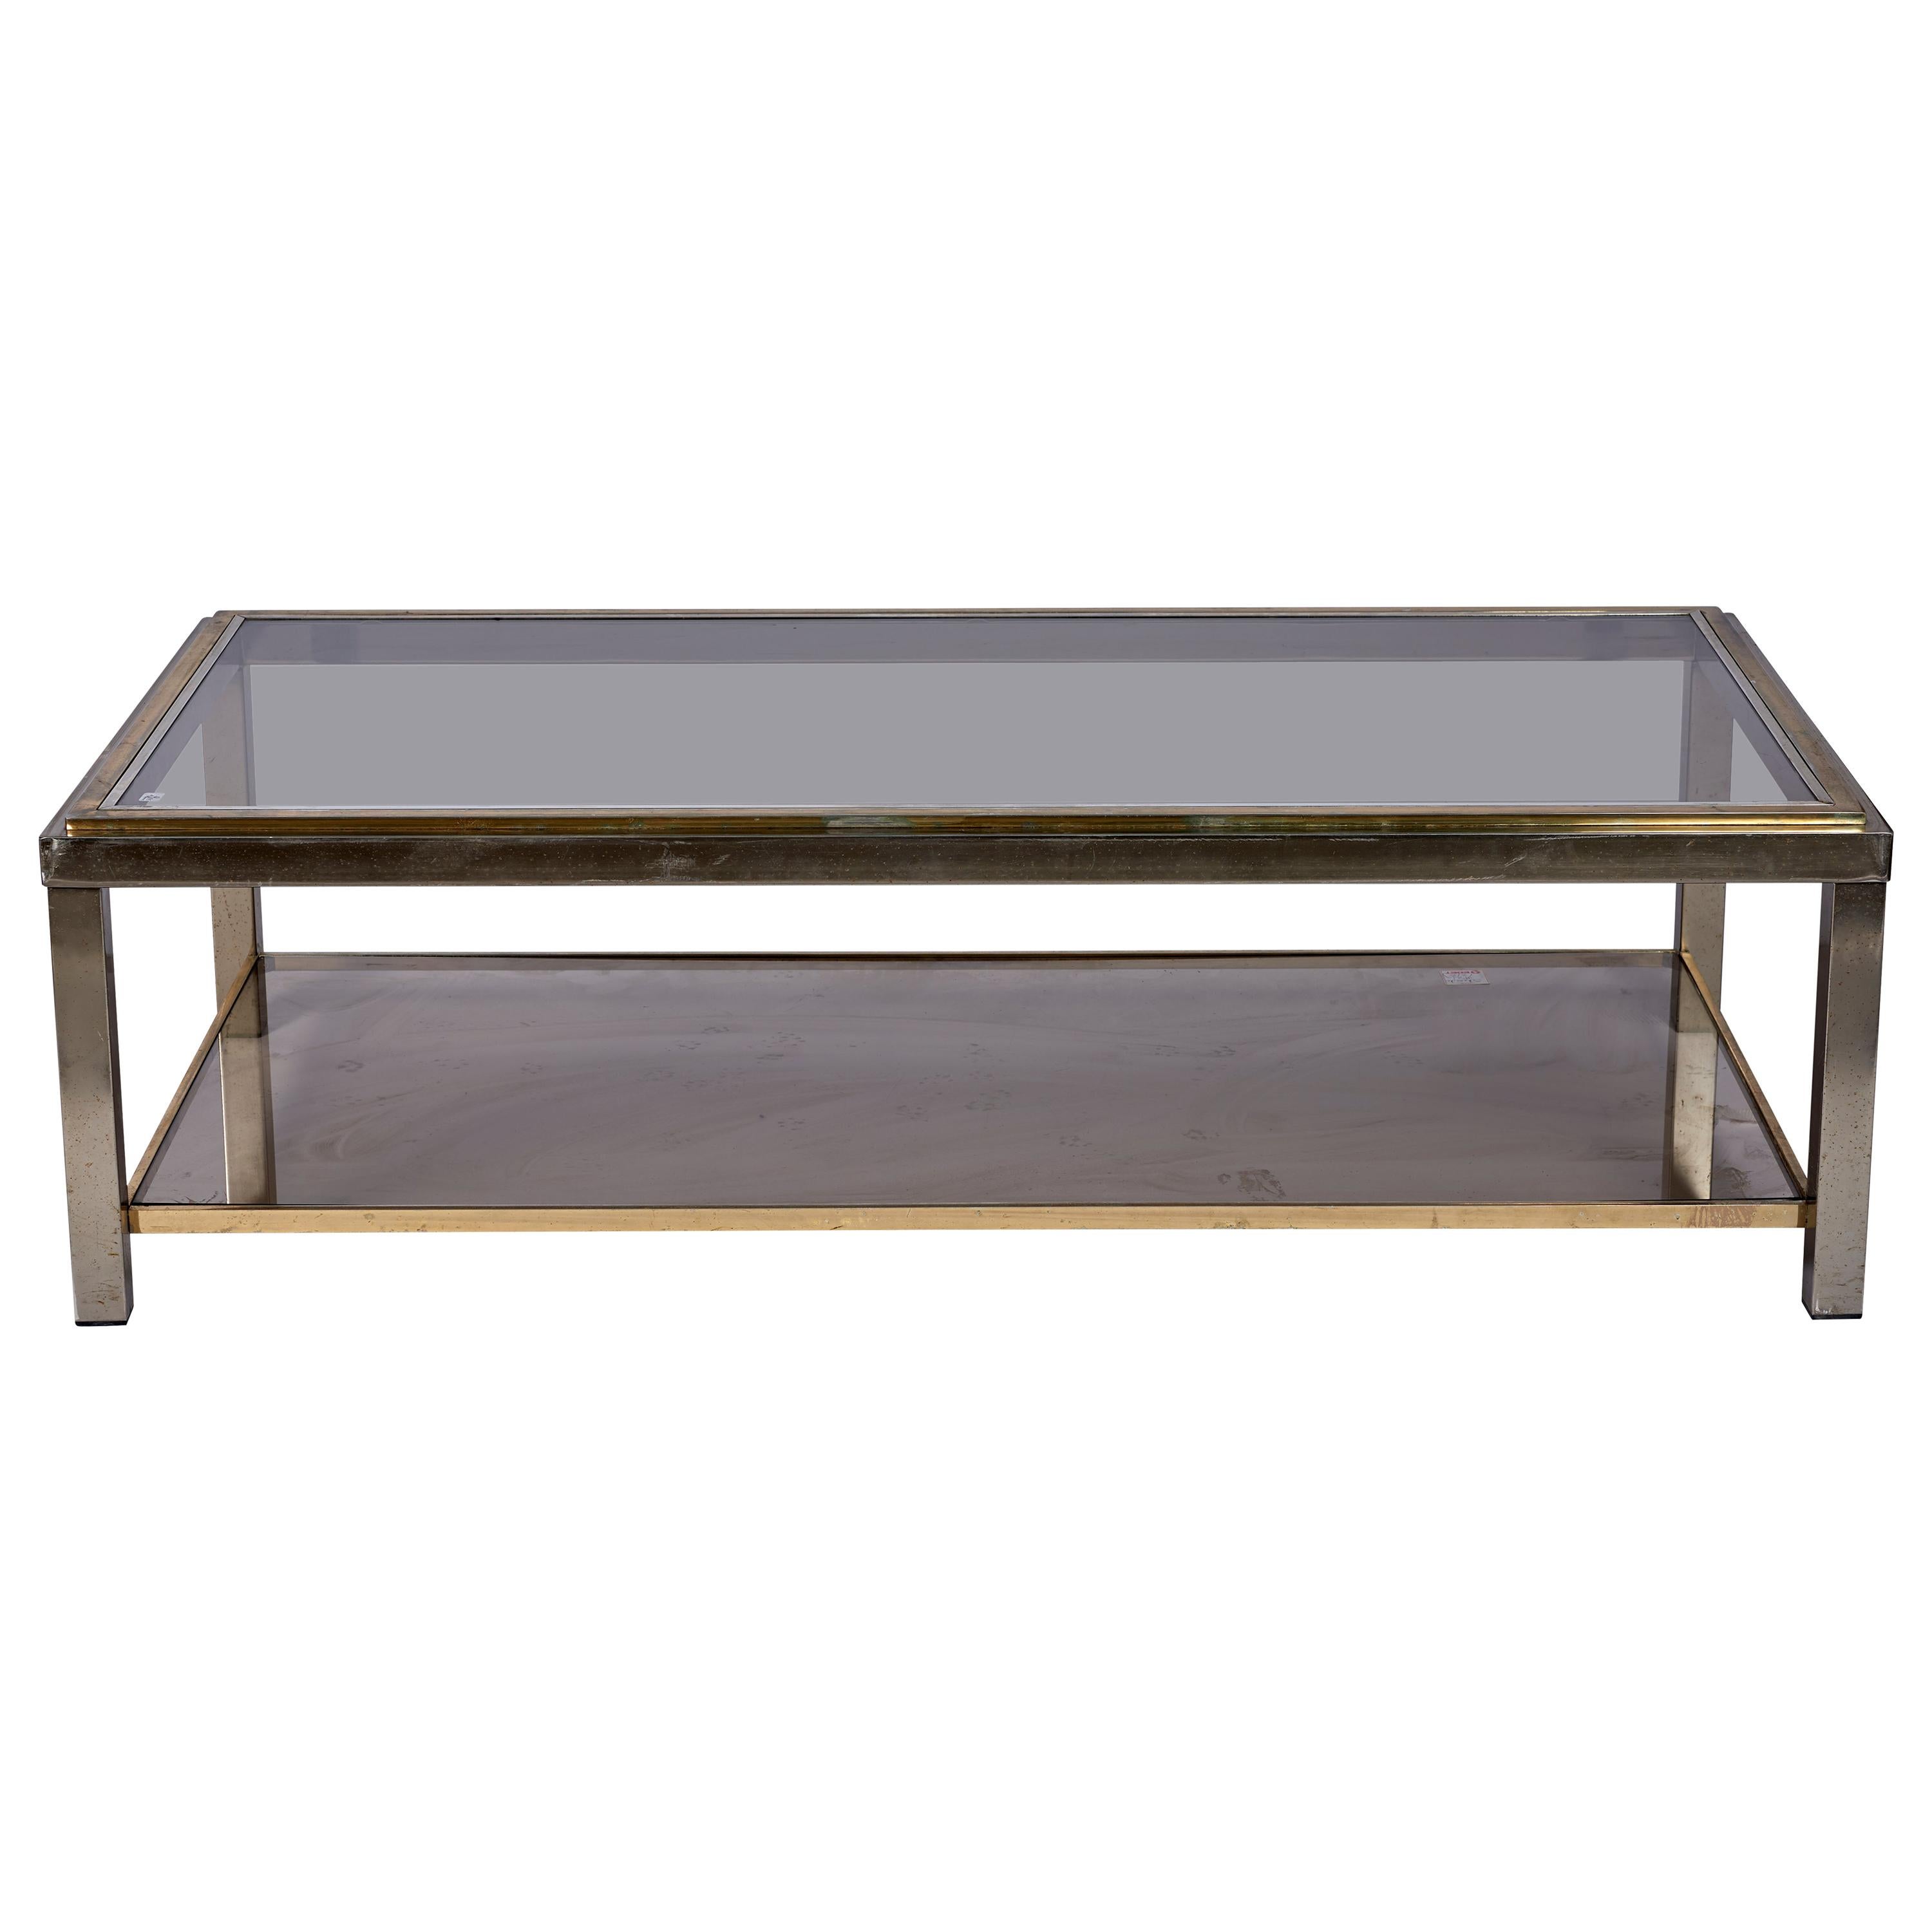 1950s Italian Chrome and Brass Coffee Table by Willy Rizzo